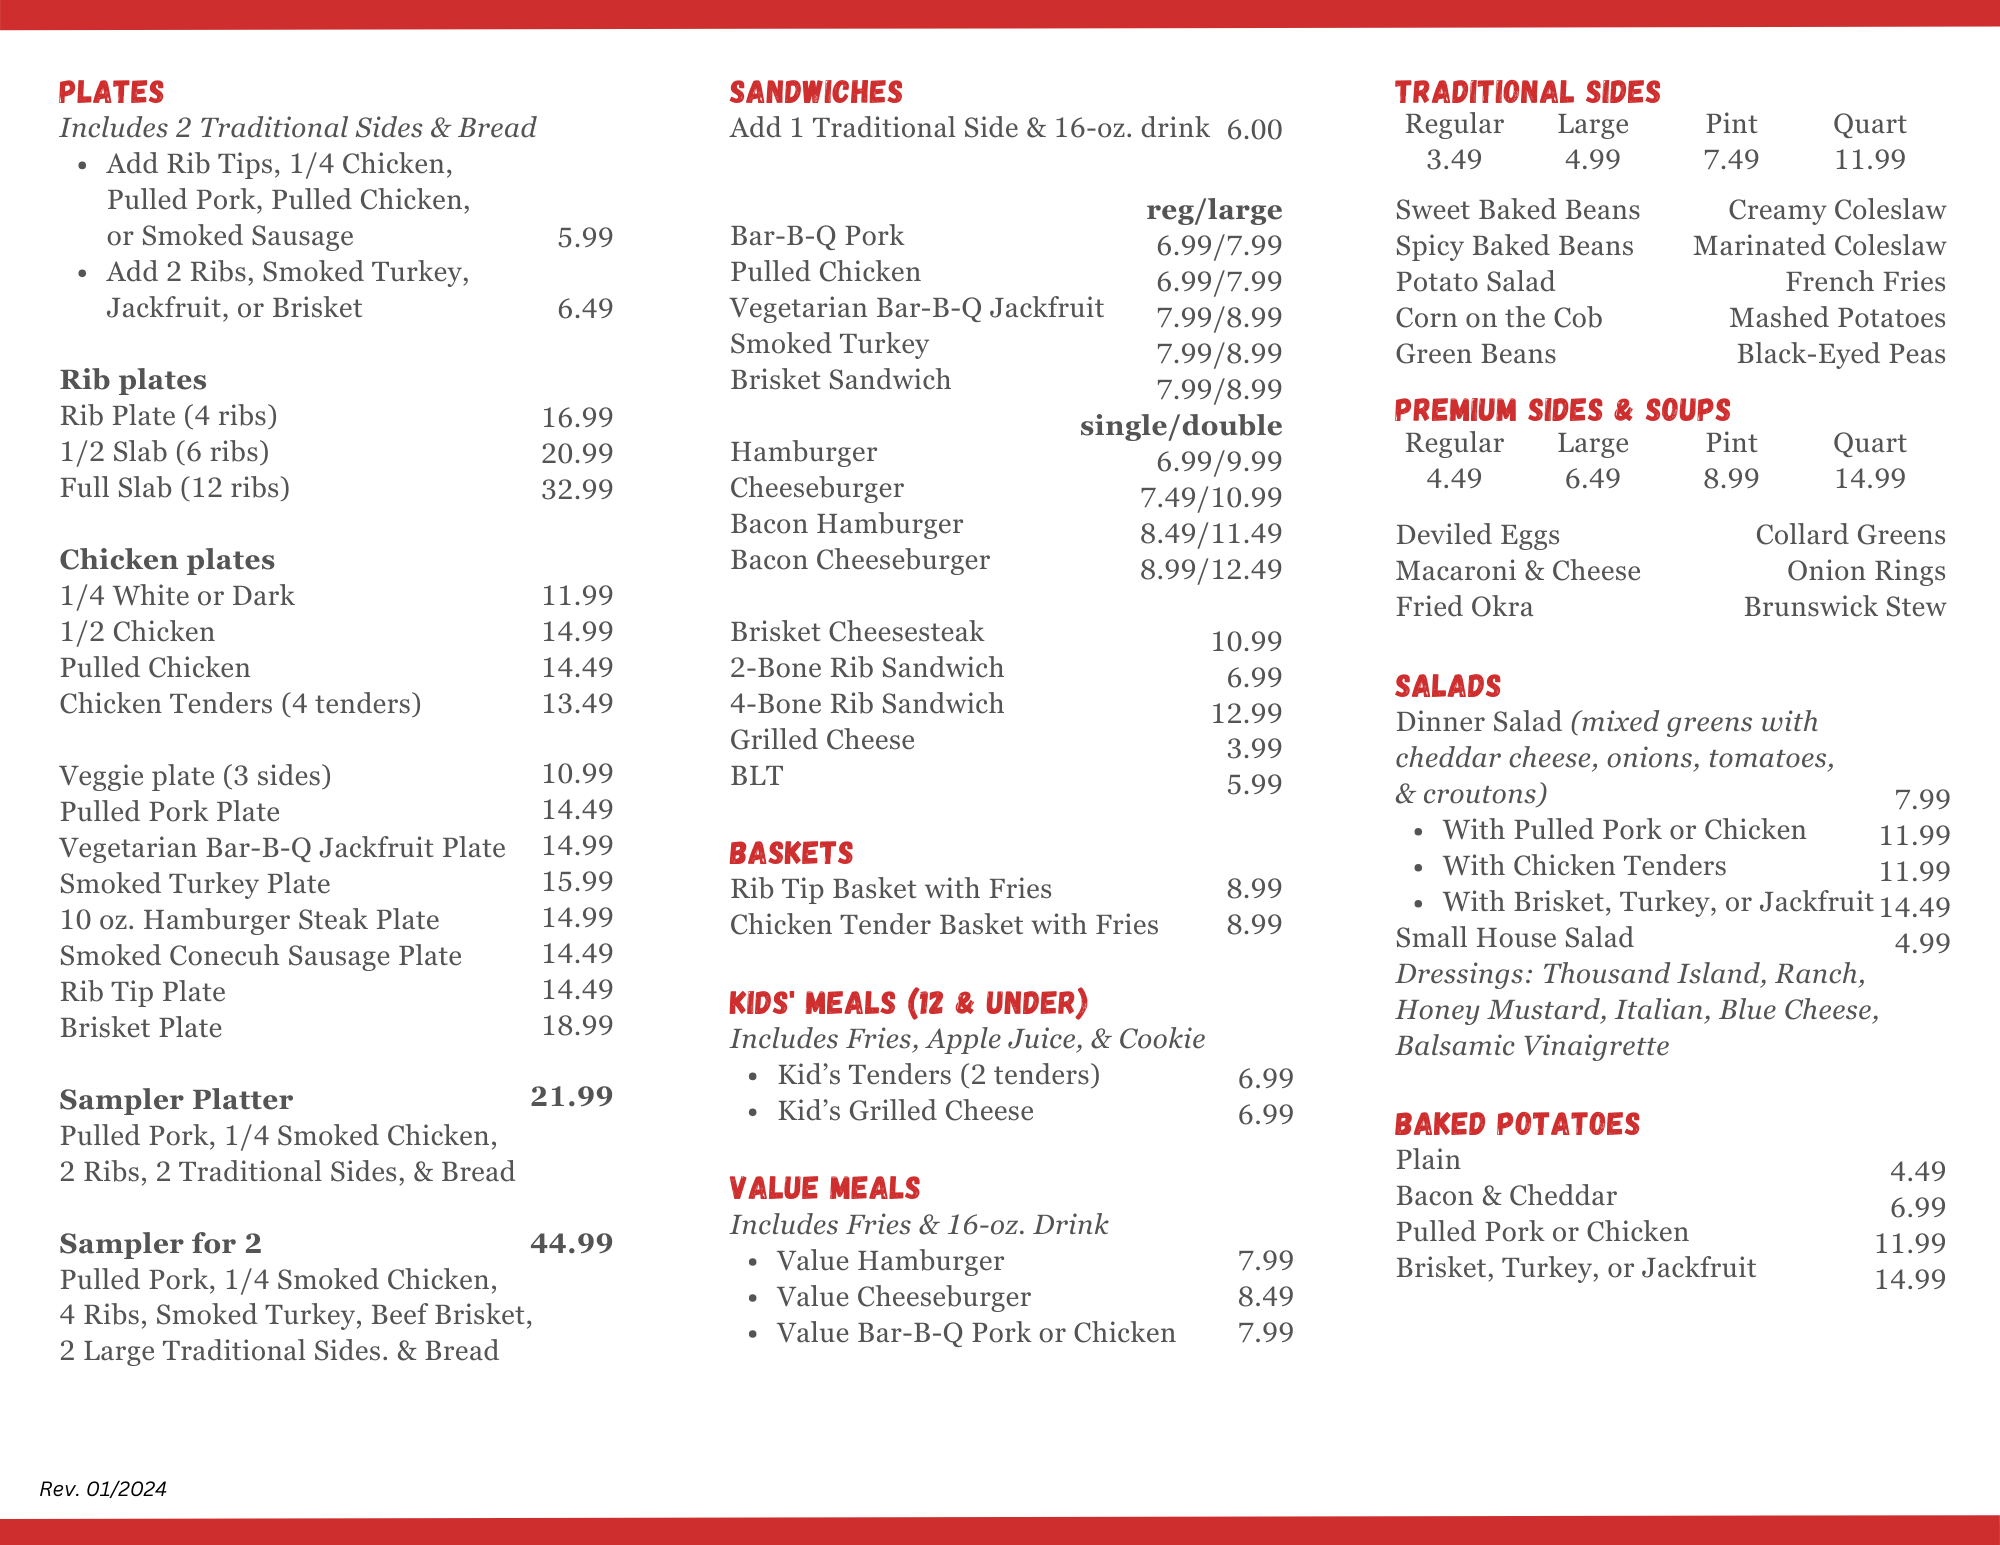 Menu - page 2 If you need assistance with ordering, call us at 205-699-4766.